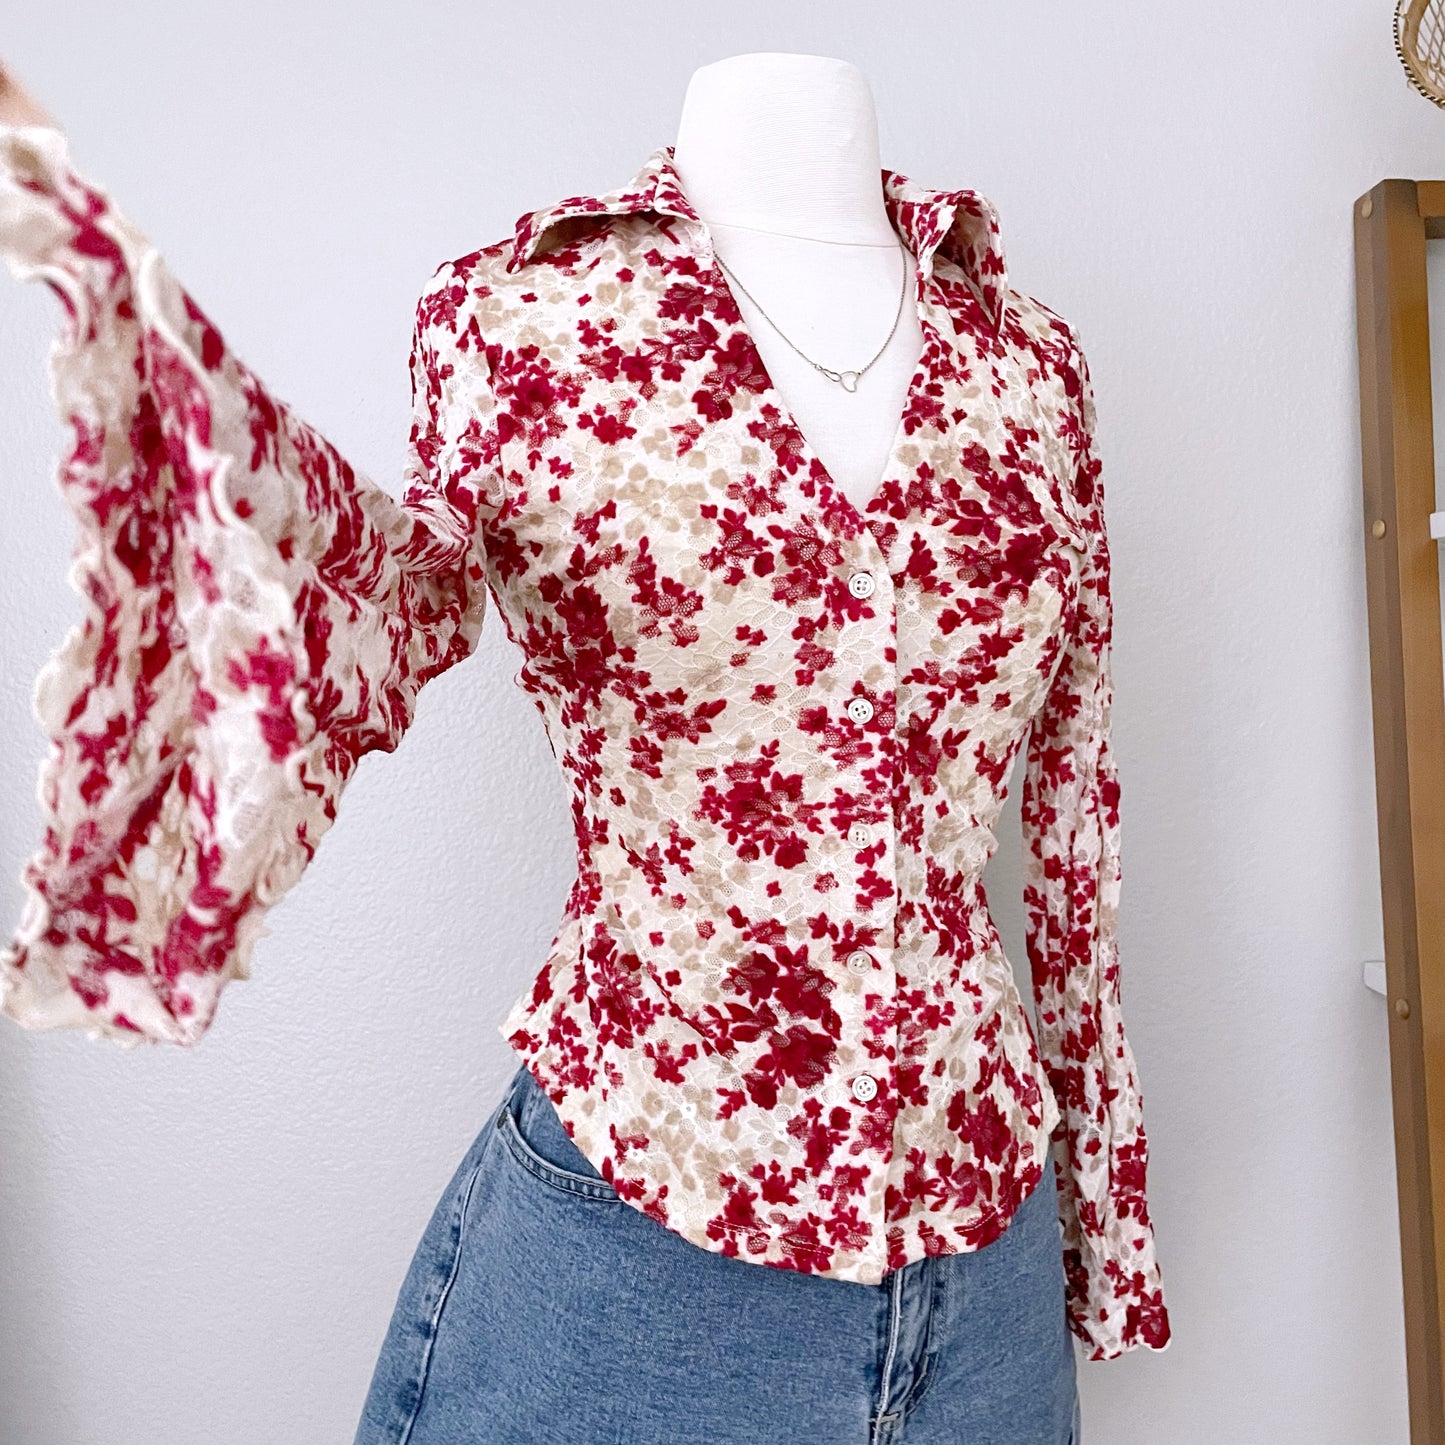 Lace Floral Bell Sleeve Button Front Top (M)